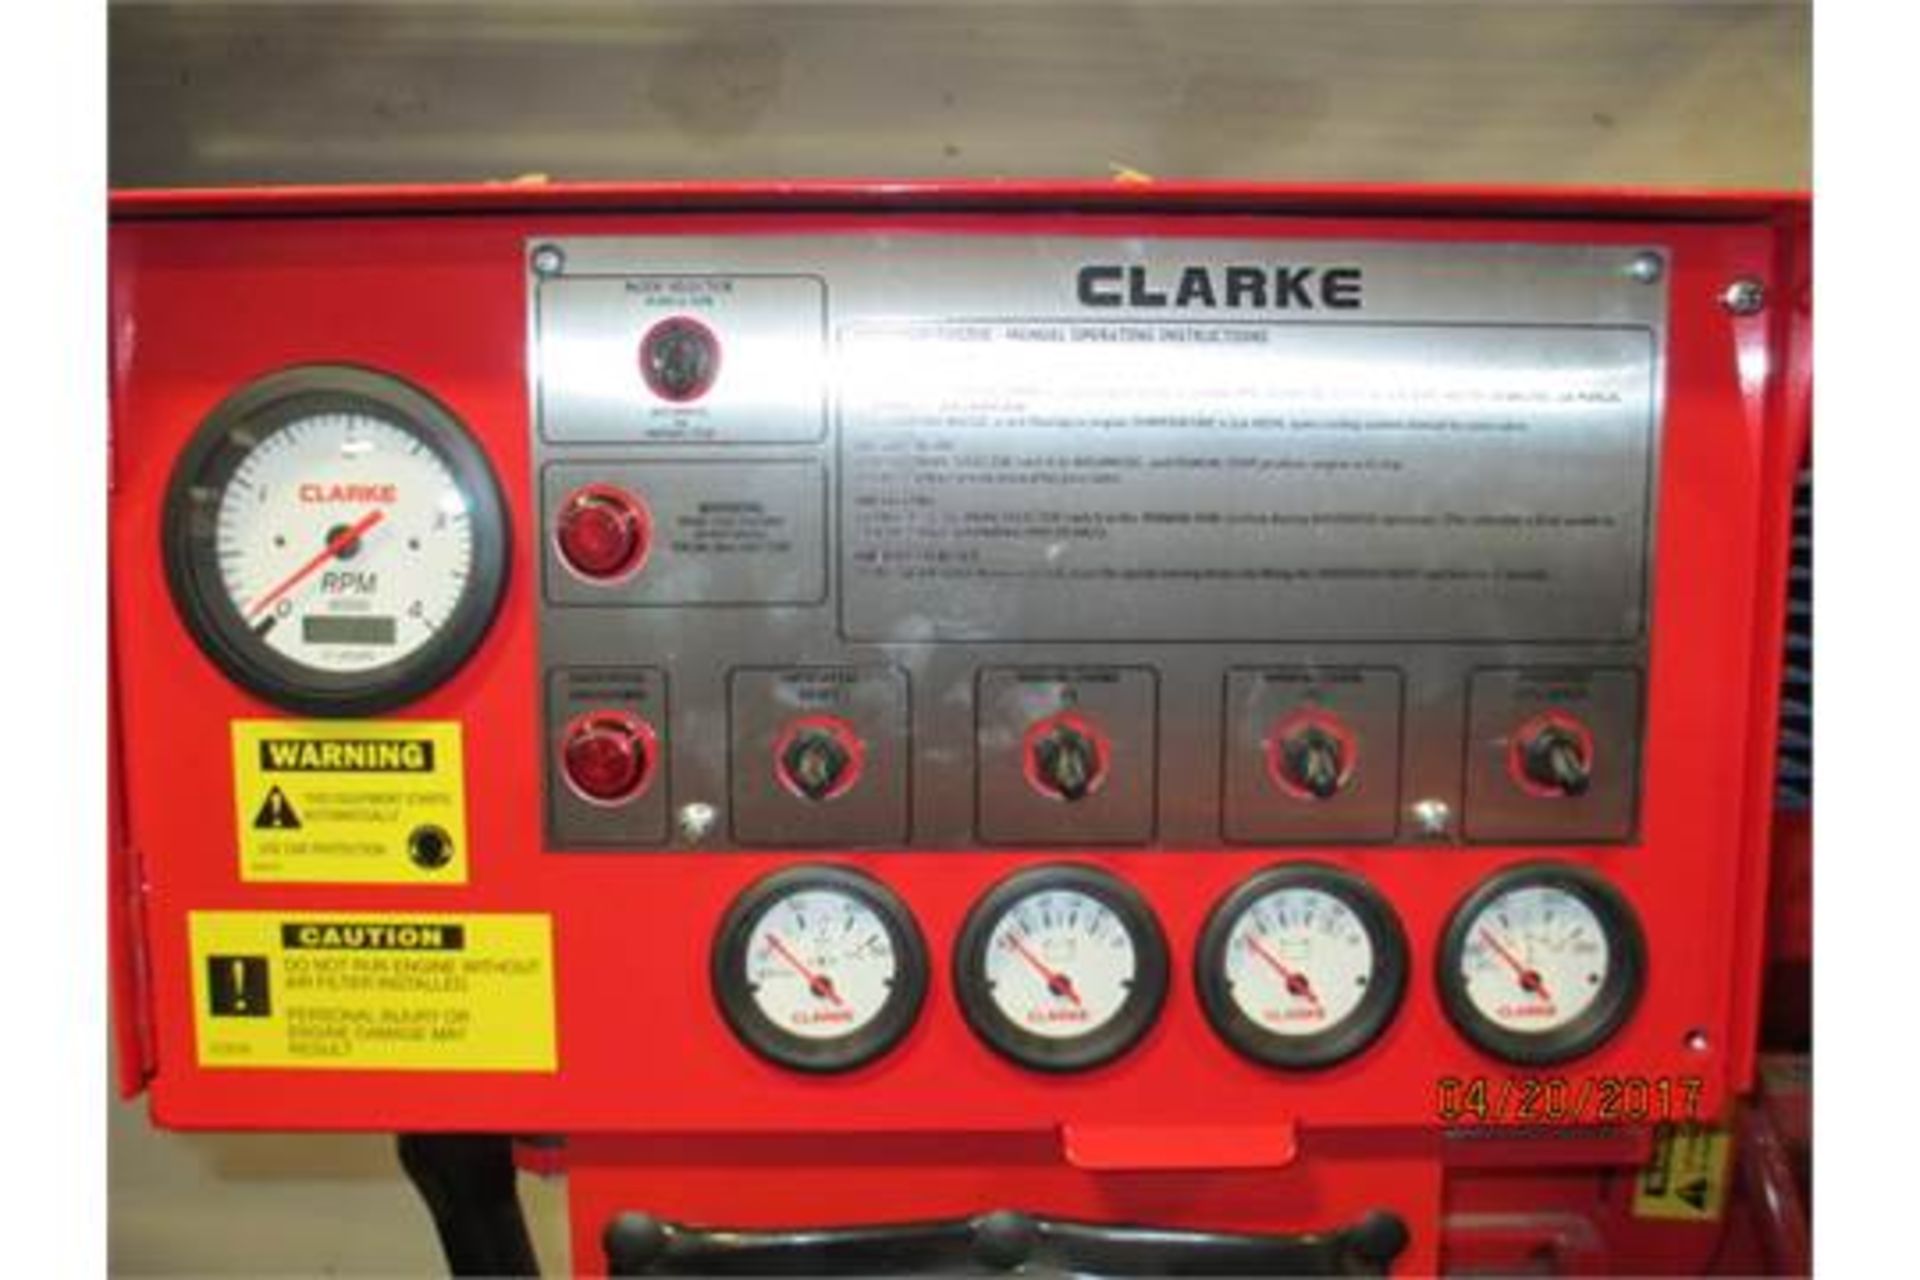 Clark Fire Pump - Sterling Heights, MI - Image 3 of 3